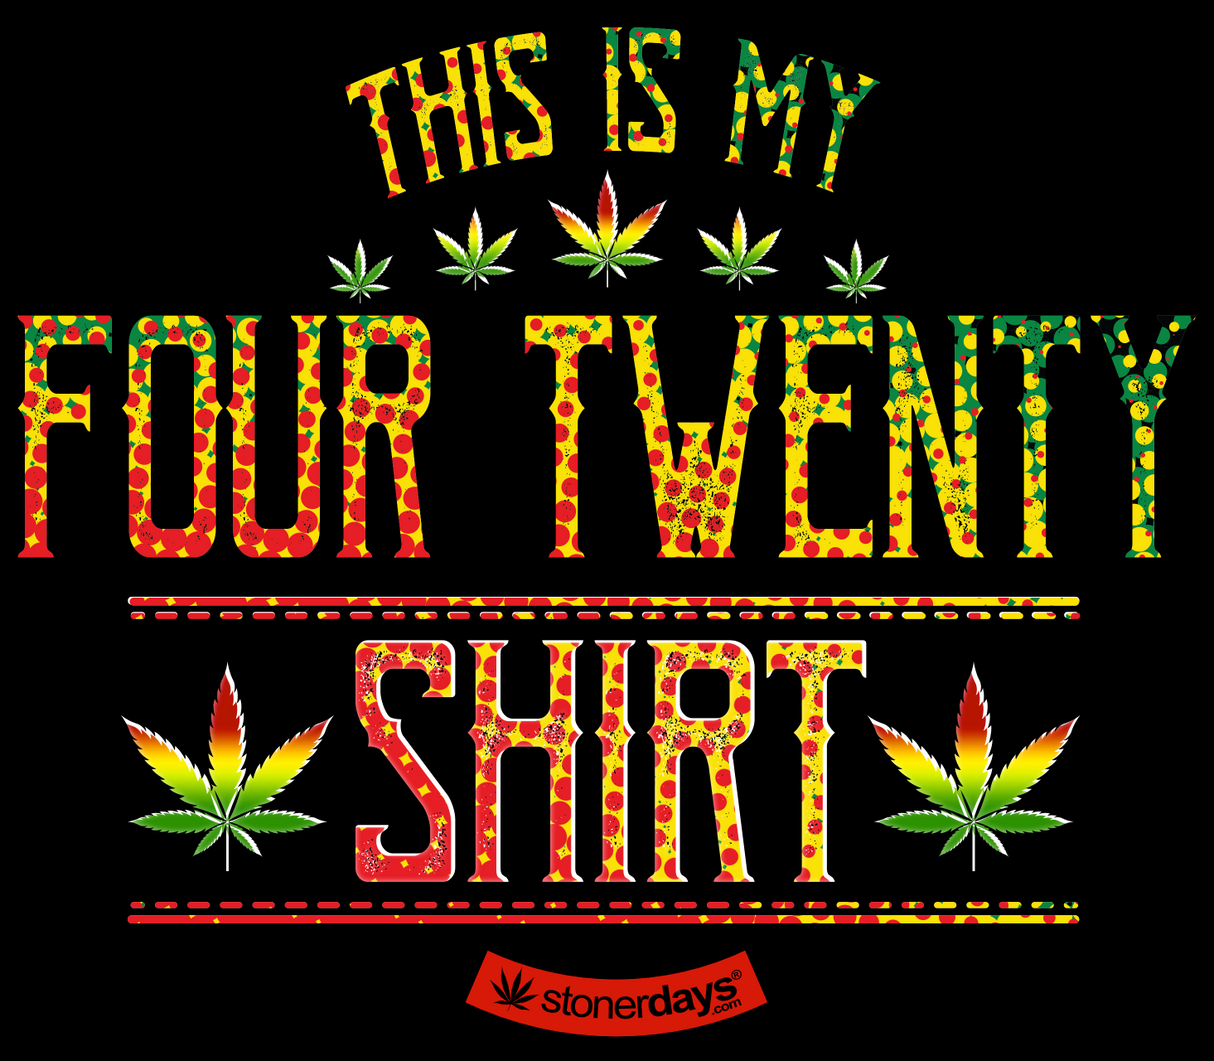 StonerDays Men's Long Sleeve Shirt in Green with 'This Is My Four Twenty' Print